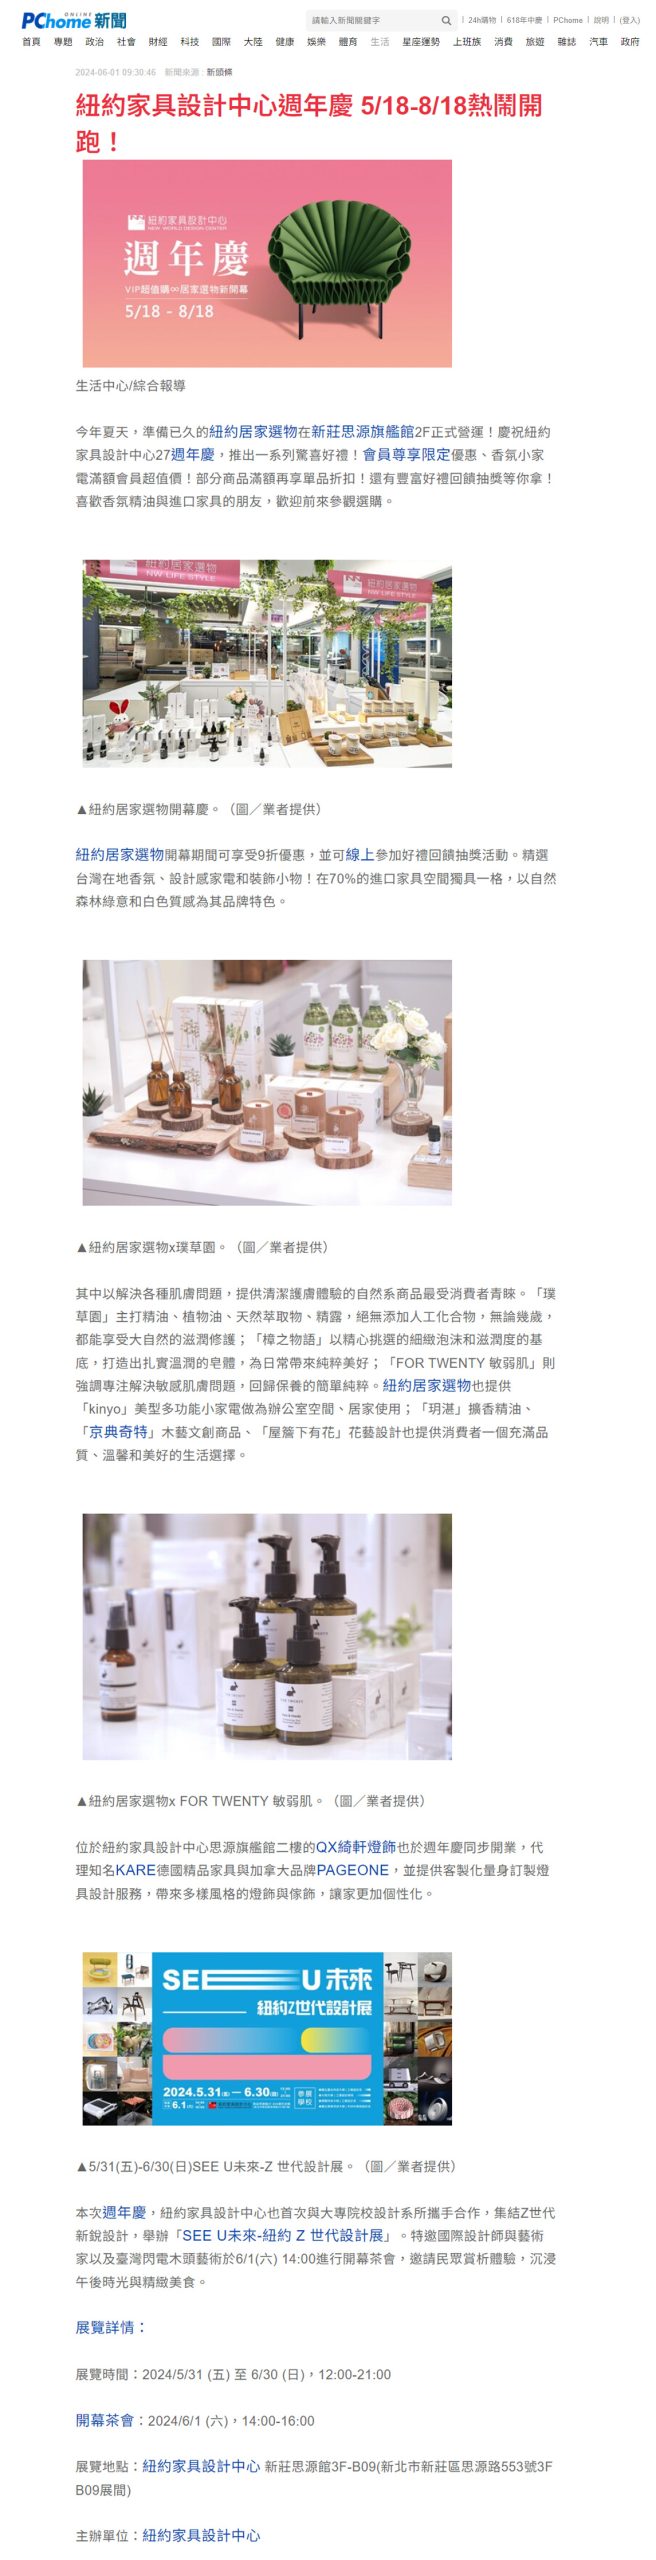 PCHome Online新聞